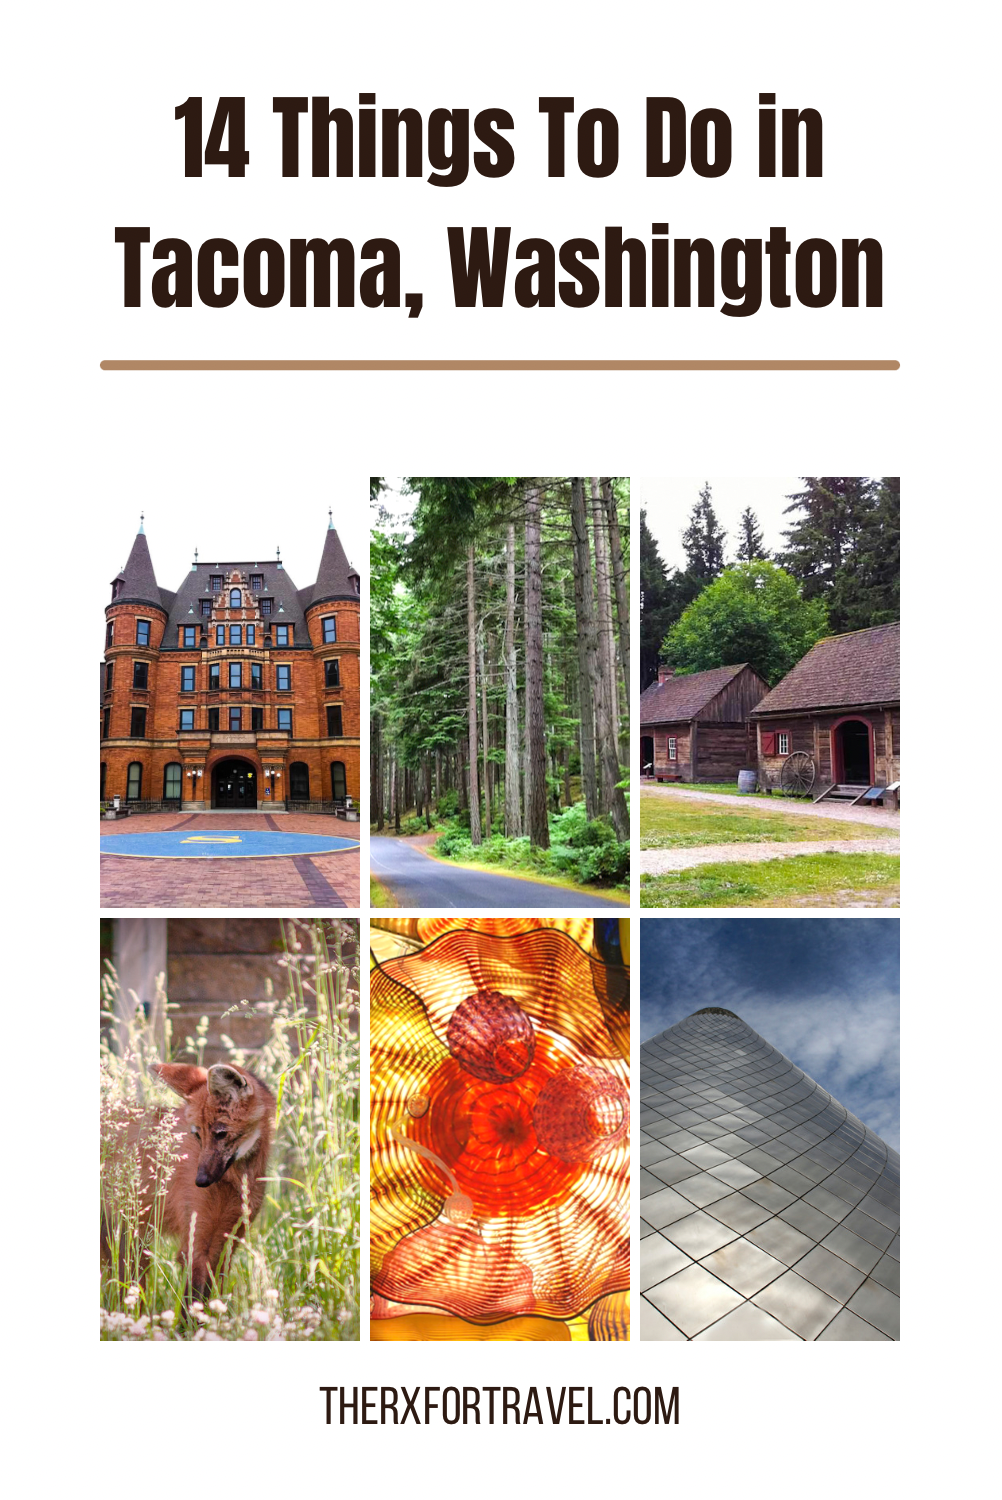 Read on to find out more about some free, some educational, and all the fun things to do in Tacoma, Washington. 